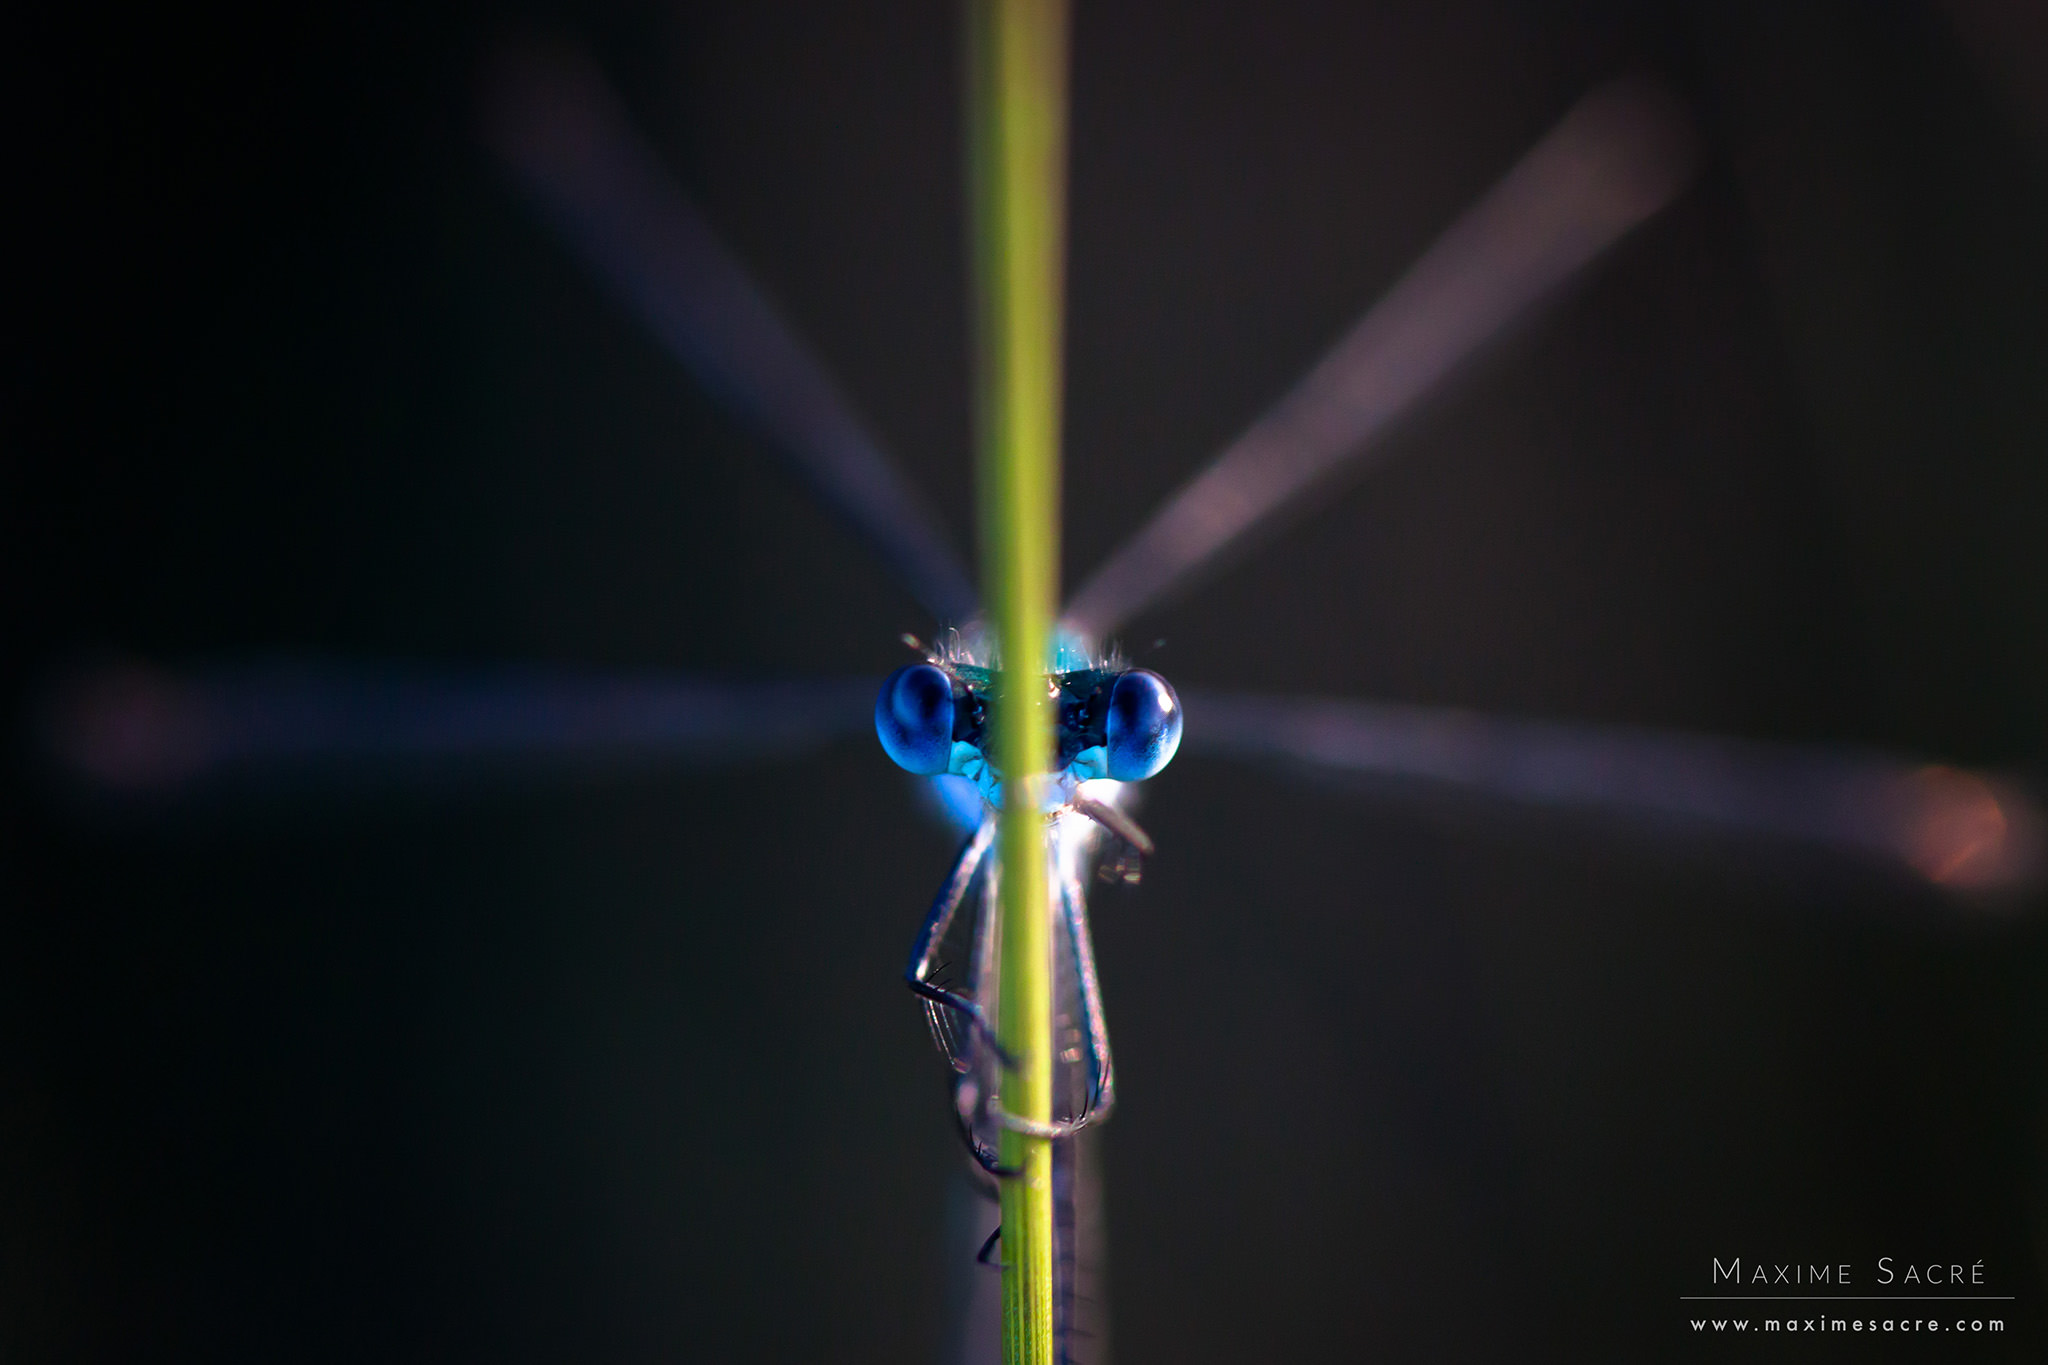 How to Photograph Dragonflies